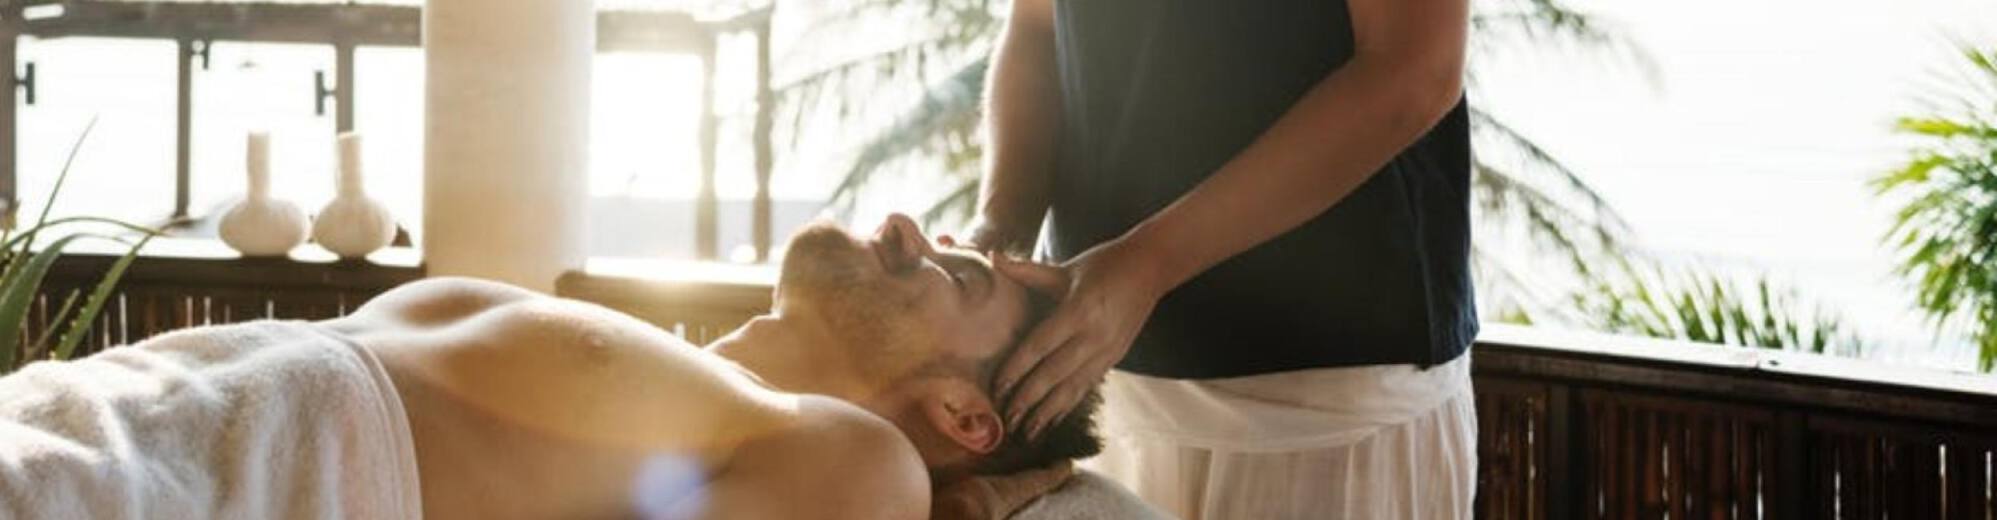 Massage Therapist Resume Sample (Guide & 20+ Examples)